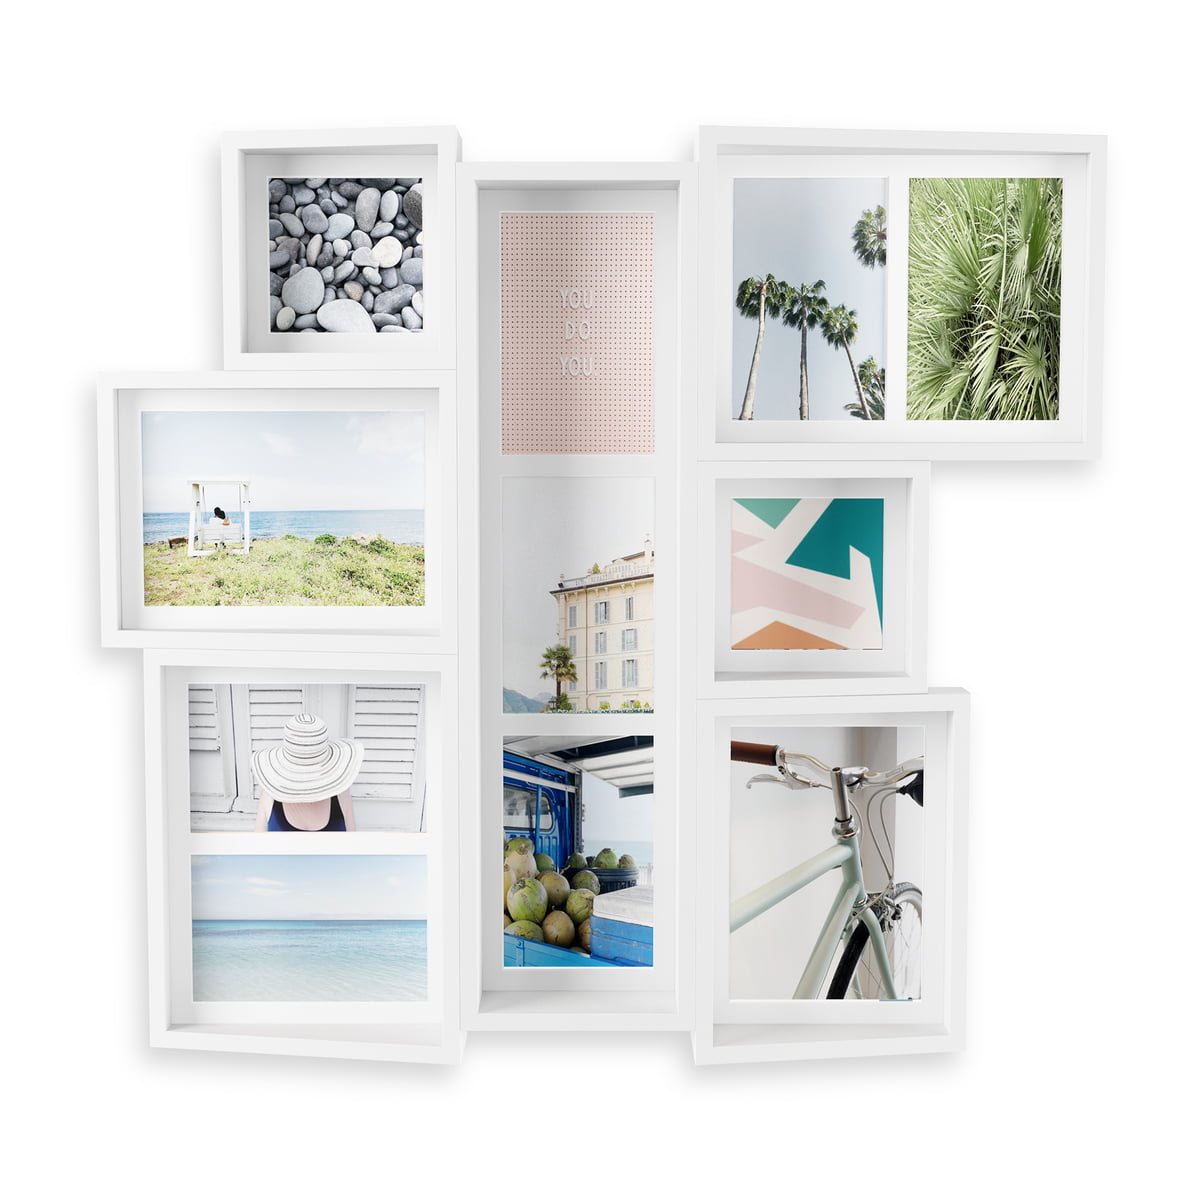 Featured image of post Umbra Edge Photo Frame Its innovative rubber frame makes it more durable than a typical wall mirror and gives it a modern industrialized look